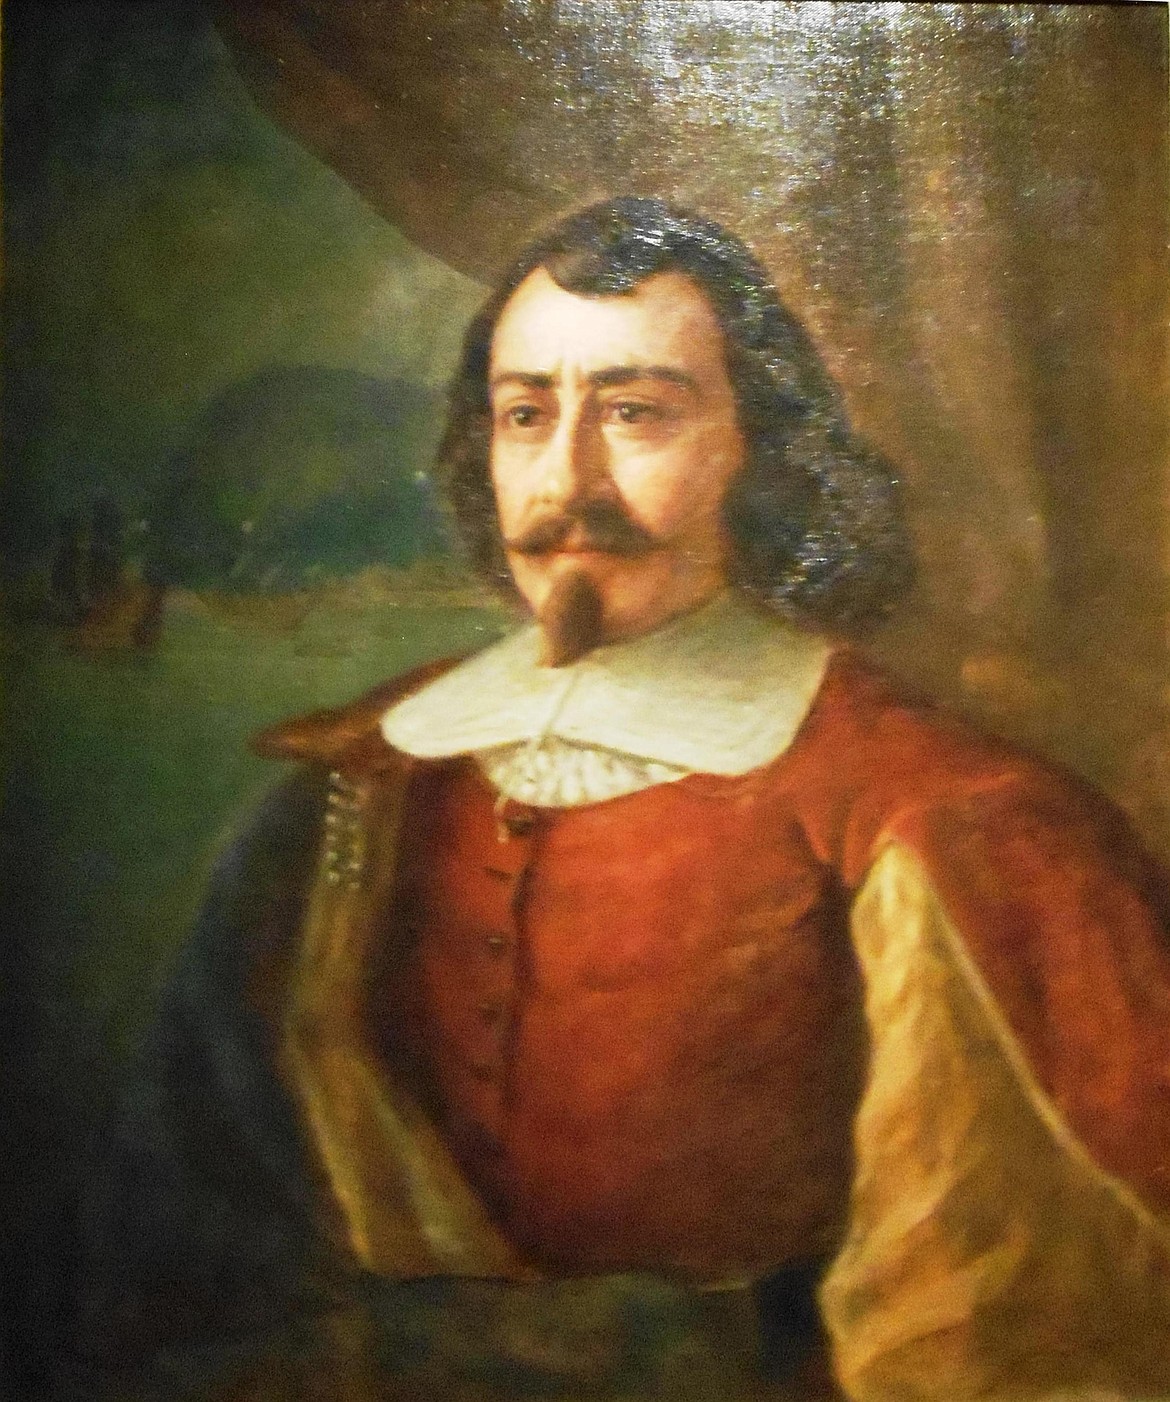 Samuel de Champlain (1567-1635), French explorer and founder of Quebec and New France (Canada, Arcadia and Louisiana) never saw Niagara Falls but wrote about it based on Indian accounts — the first European to actually see the falls being Father Louis Hennepin, a Recollect priest from the Spanish Netherlands in the winter of 1678-1679.